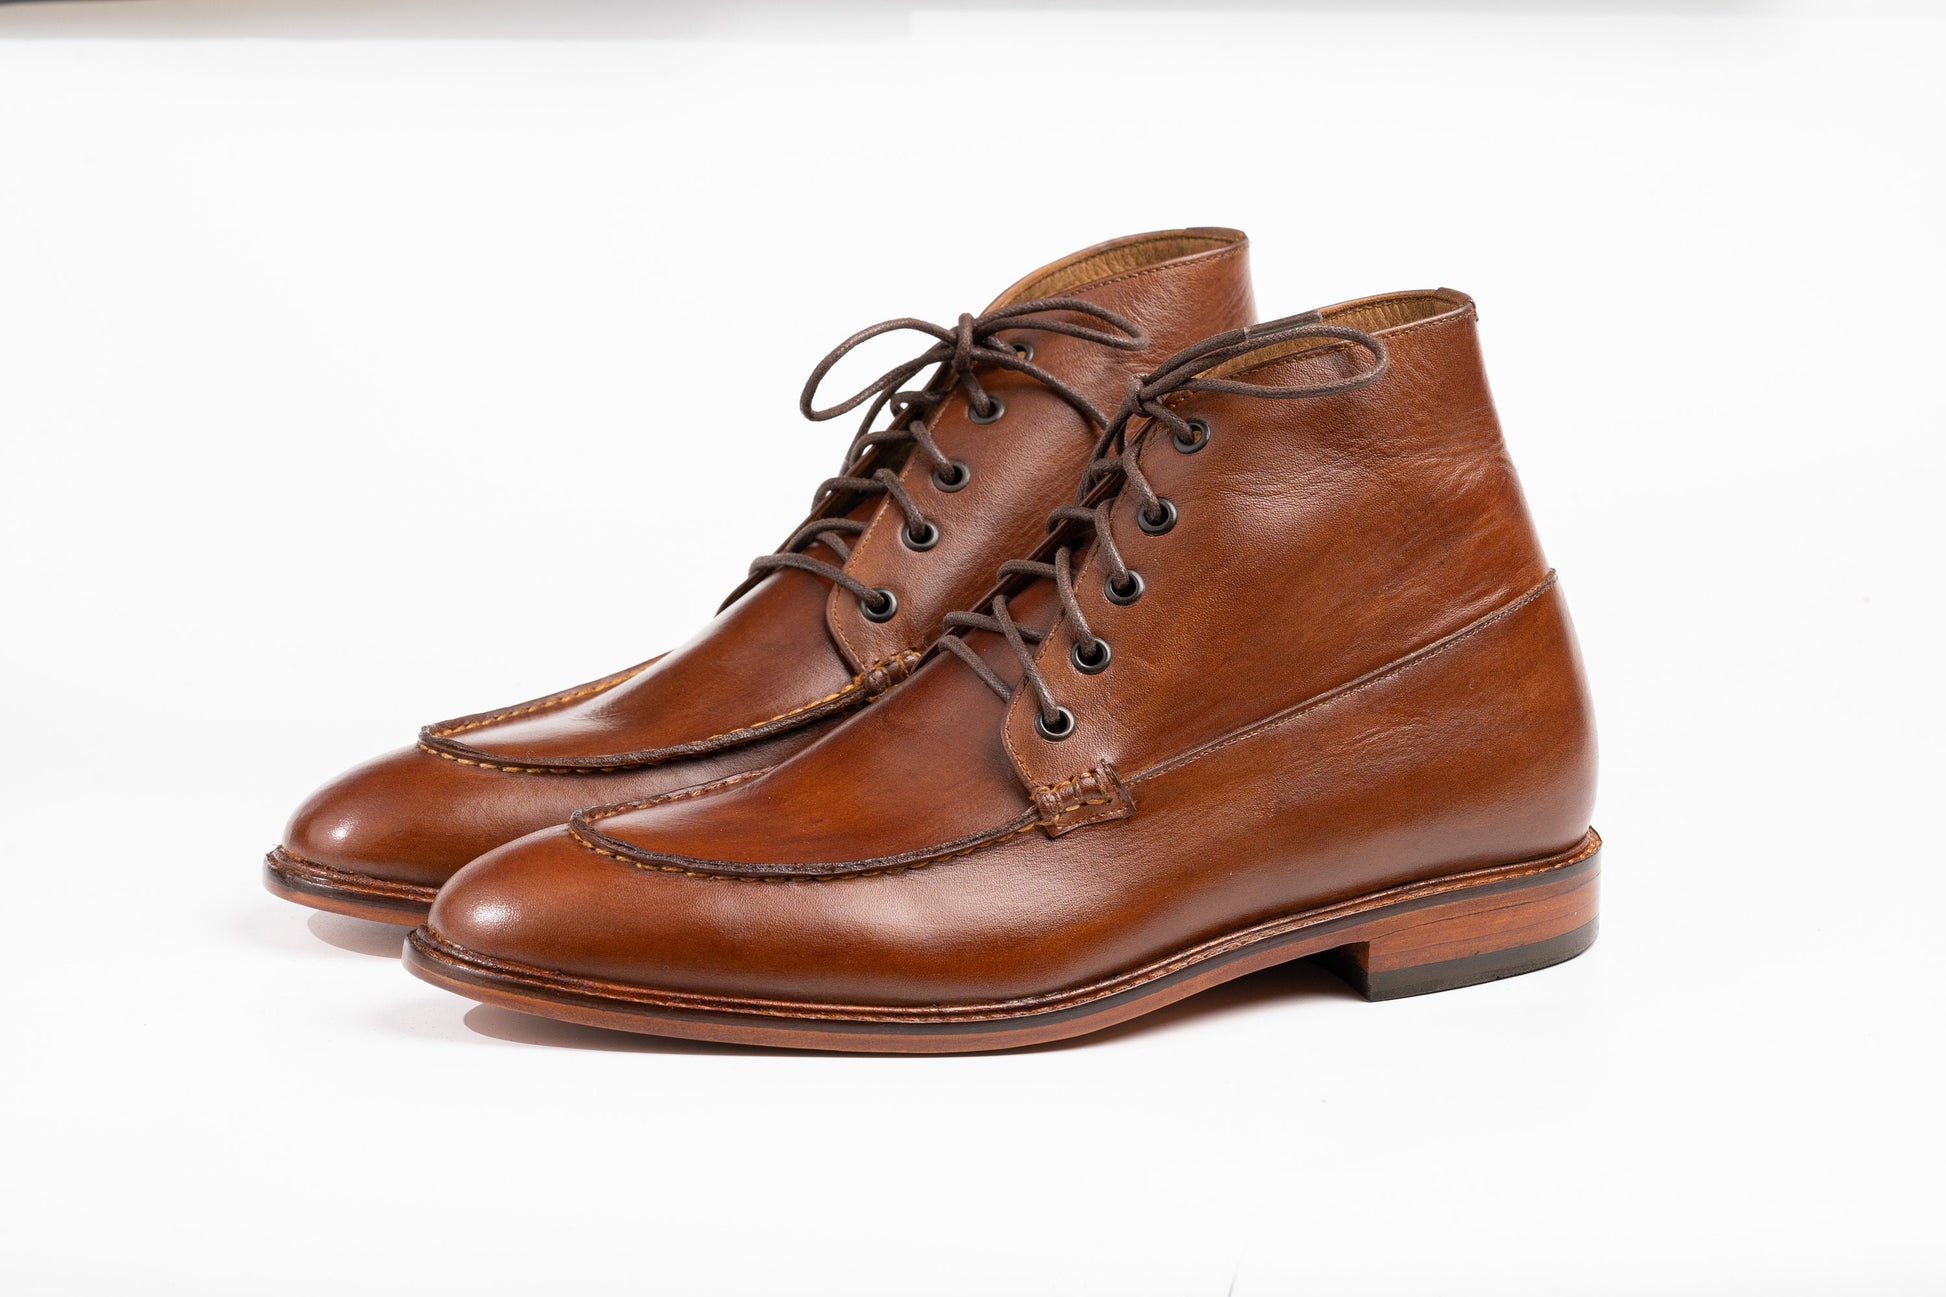 Lace Up boots, Hand Welted, Hand Lasted made using Hand-Finished Full-Grain Pull up Leather Woozy Store